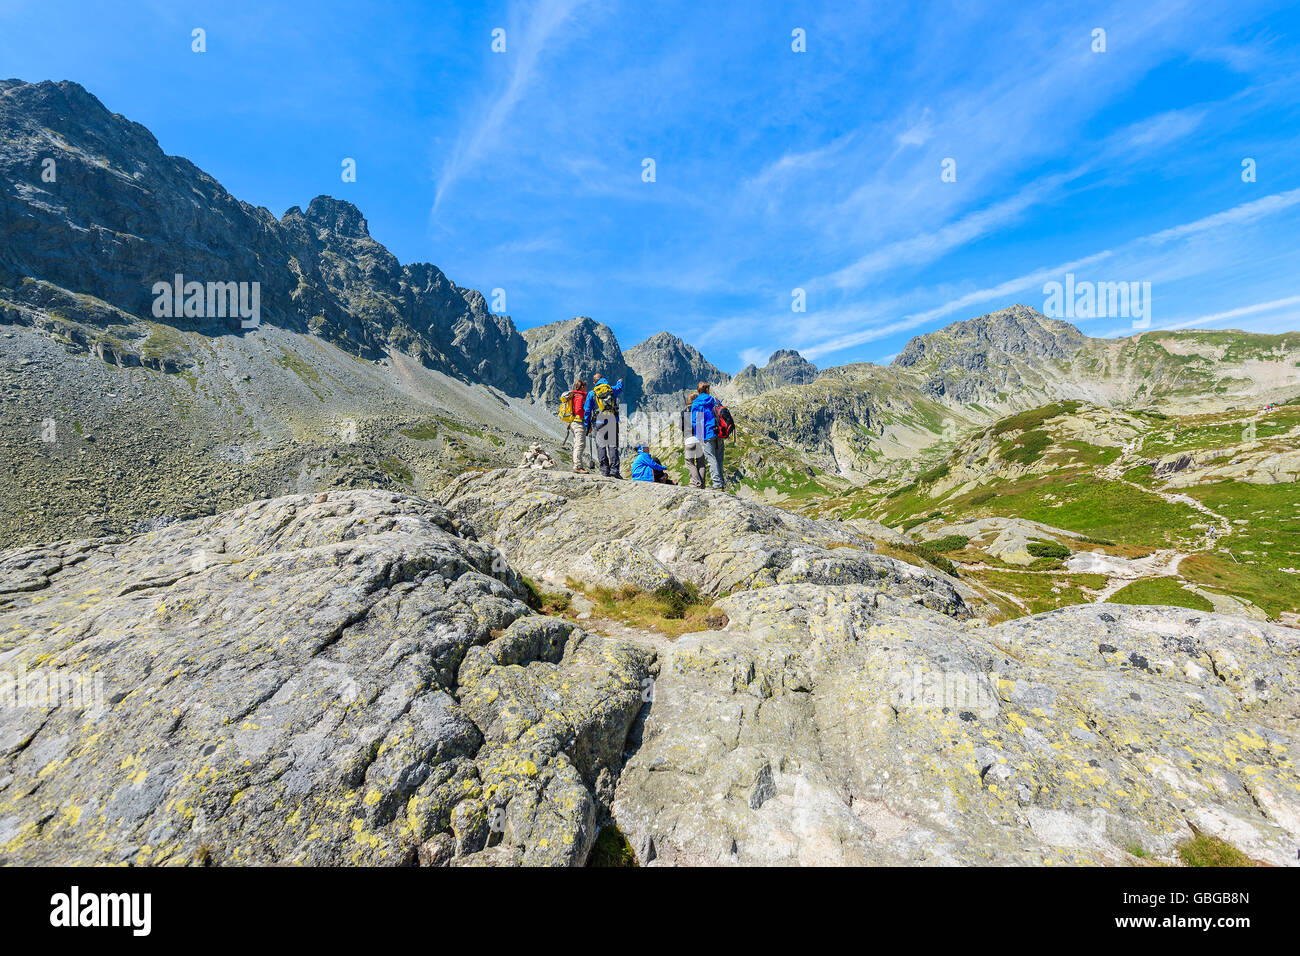 Group of tourists on top of rock looking at peaks of Starolesna valley in summer season, High Tatra Mountains, Slovakia Stock Photo